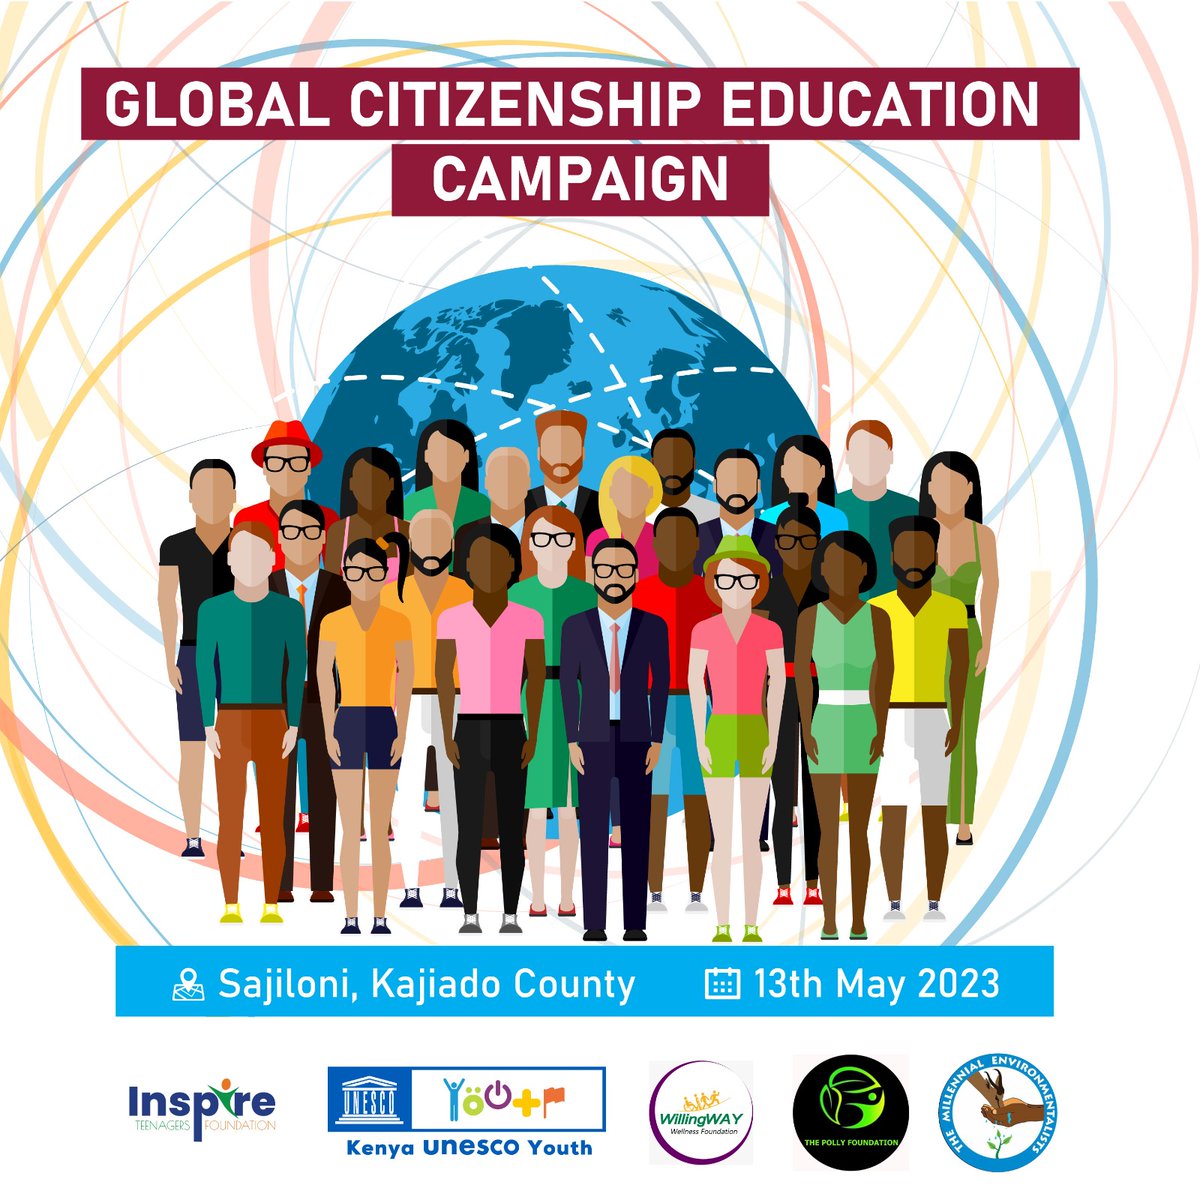 Kajiado youths are you ready?

Together with our partners, we shall be landing at Kajiado County for Global Citizenship Education Campaign this weekend.

GCED gives learners opportunities to realize their rights and obligations to promote a more inclusive, just and peaceful world